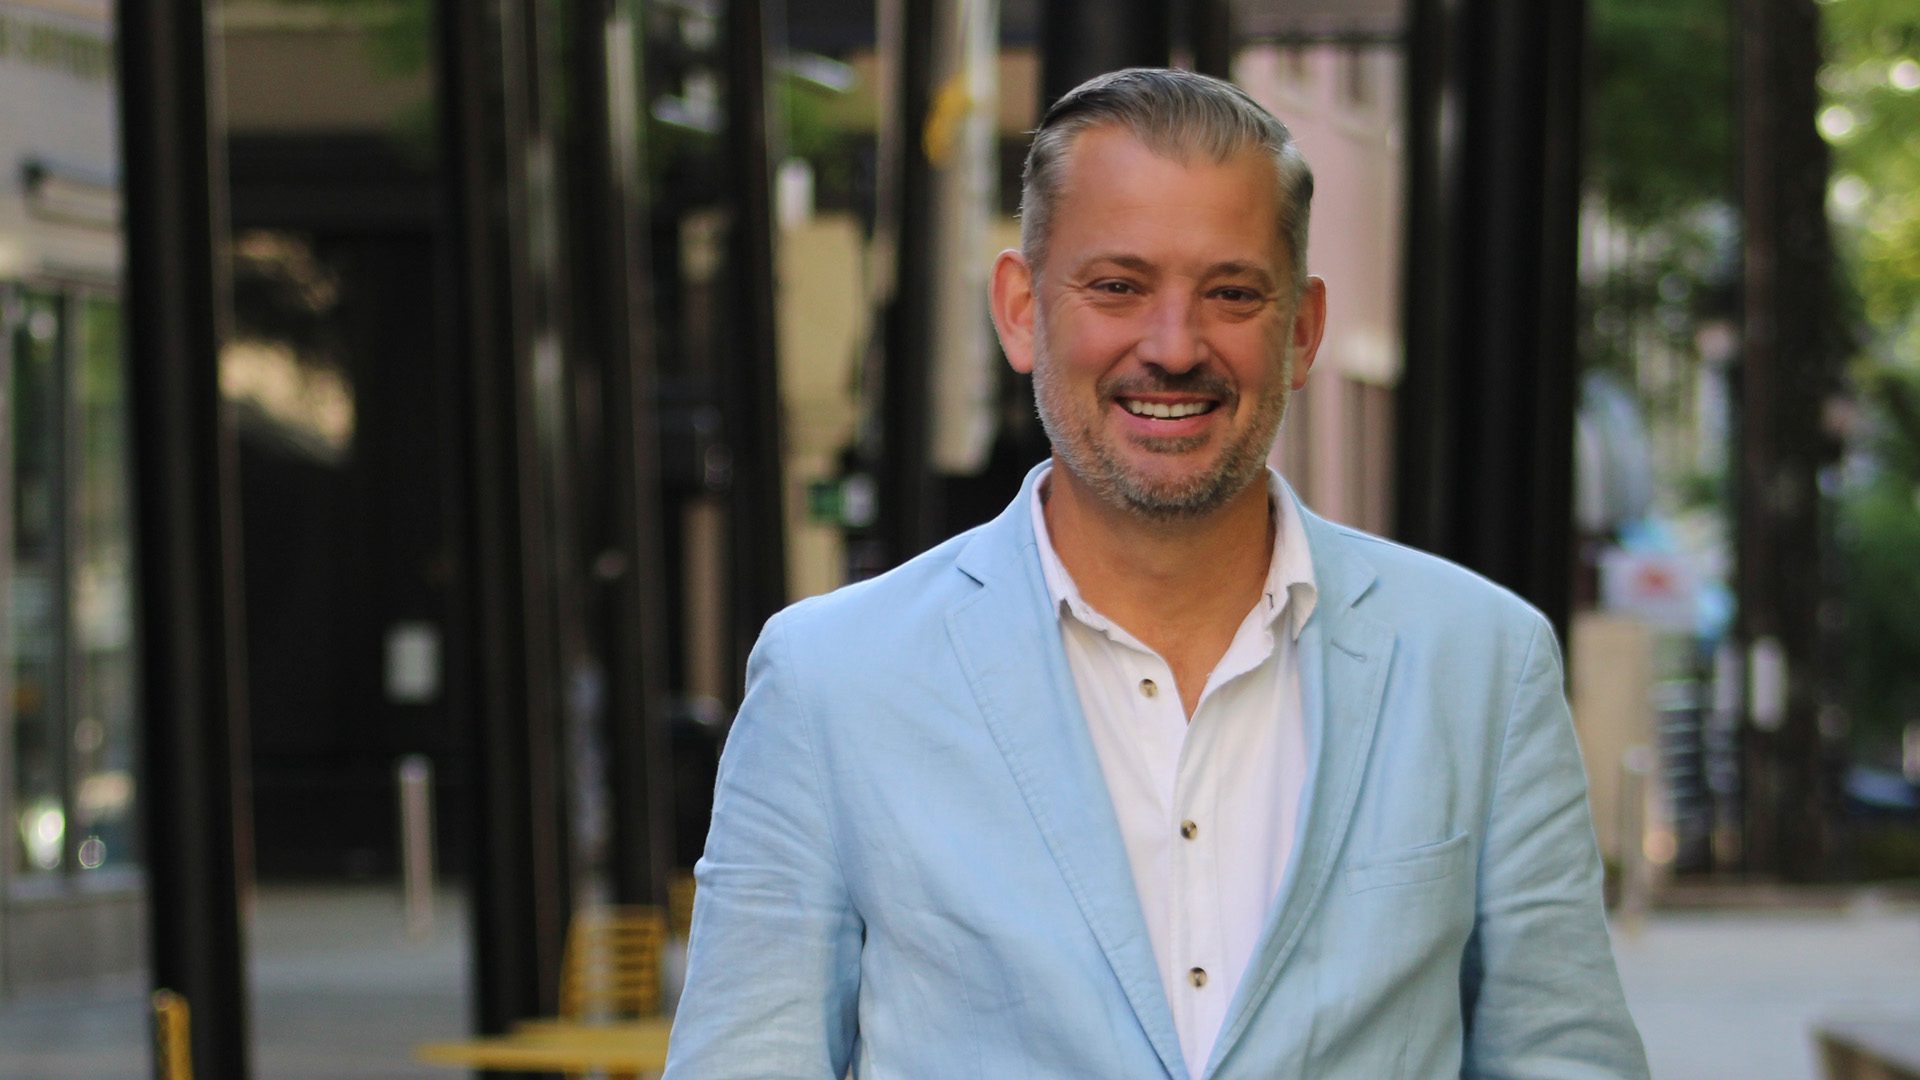 A man in a light blue blazer smiles in a city courtyard.